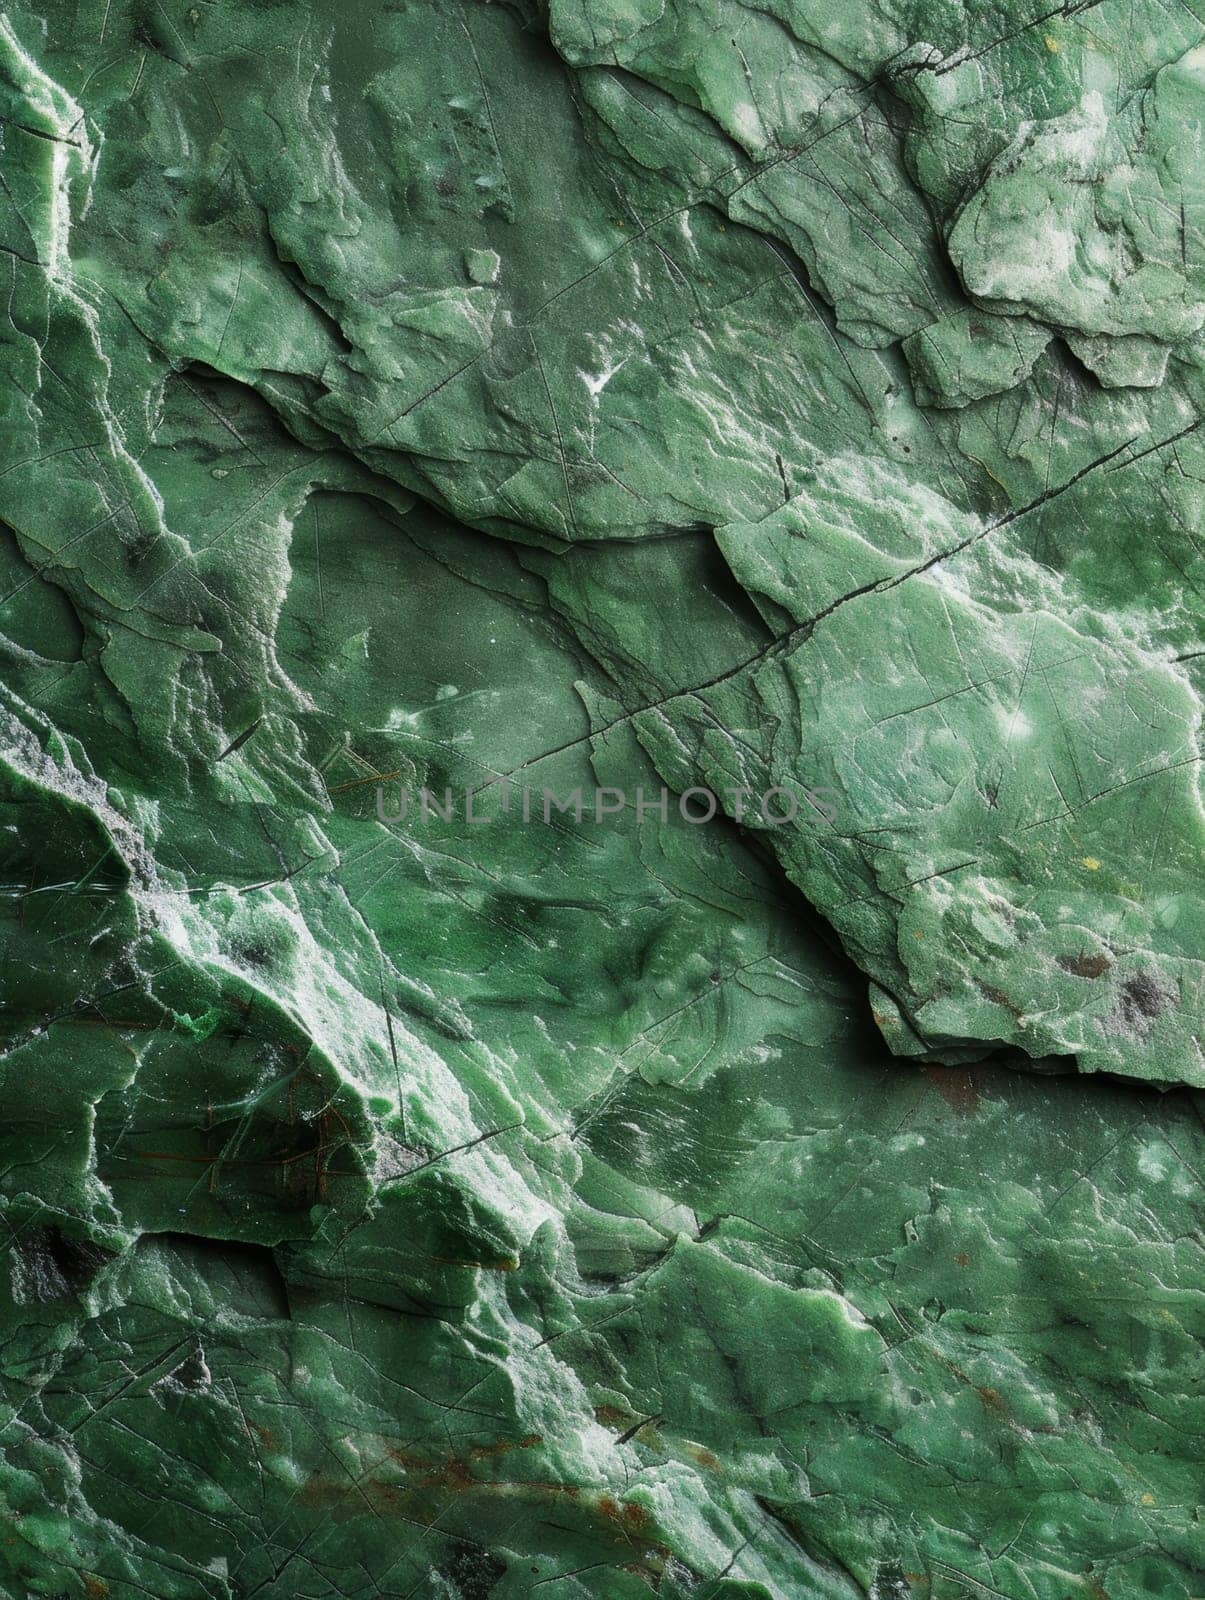 Overlapping green stone shards form a dense mosaic texture. by sfinks